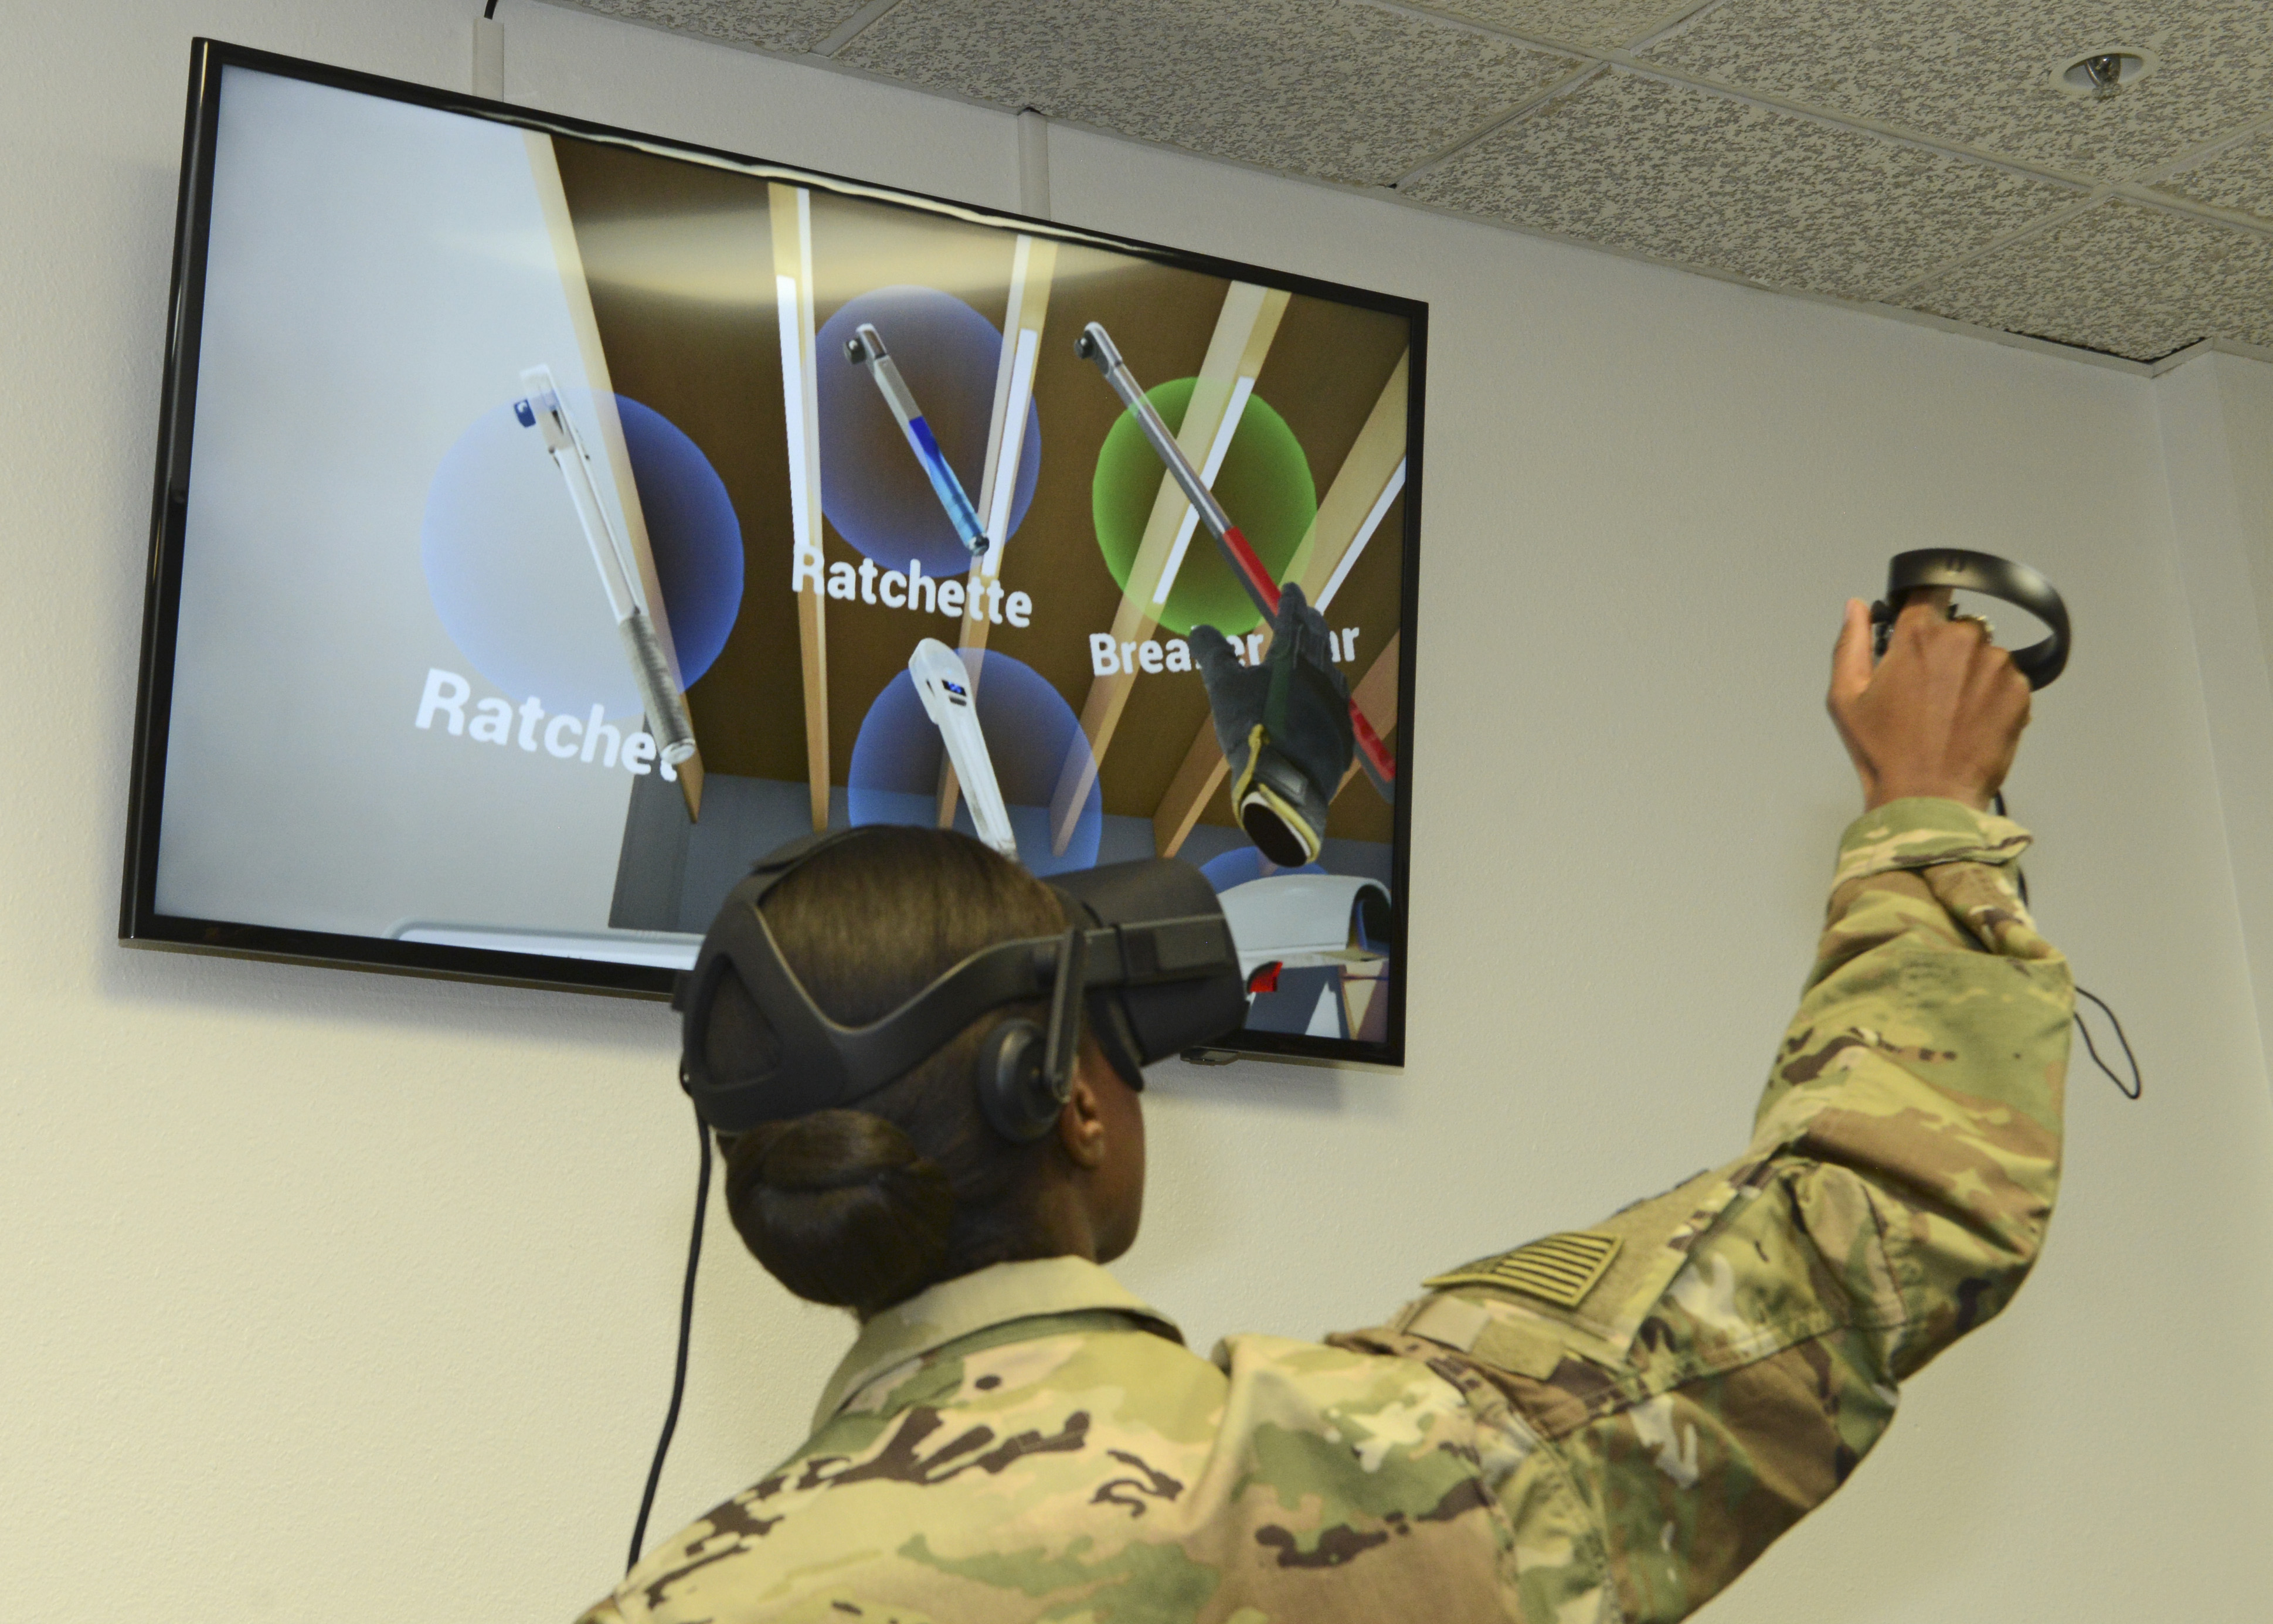 In the picture, a female is wearing the VR glasses participating to a simulation. There is a monitor connected to the VR glasses, which shows what can be seen through the glasses. There is a hand holding object at the right bottom of the screen, which represents the actual hand movement of the participant. In other words, the participant will feel like she is actually in the situation given and experiencing like reality. 